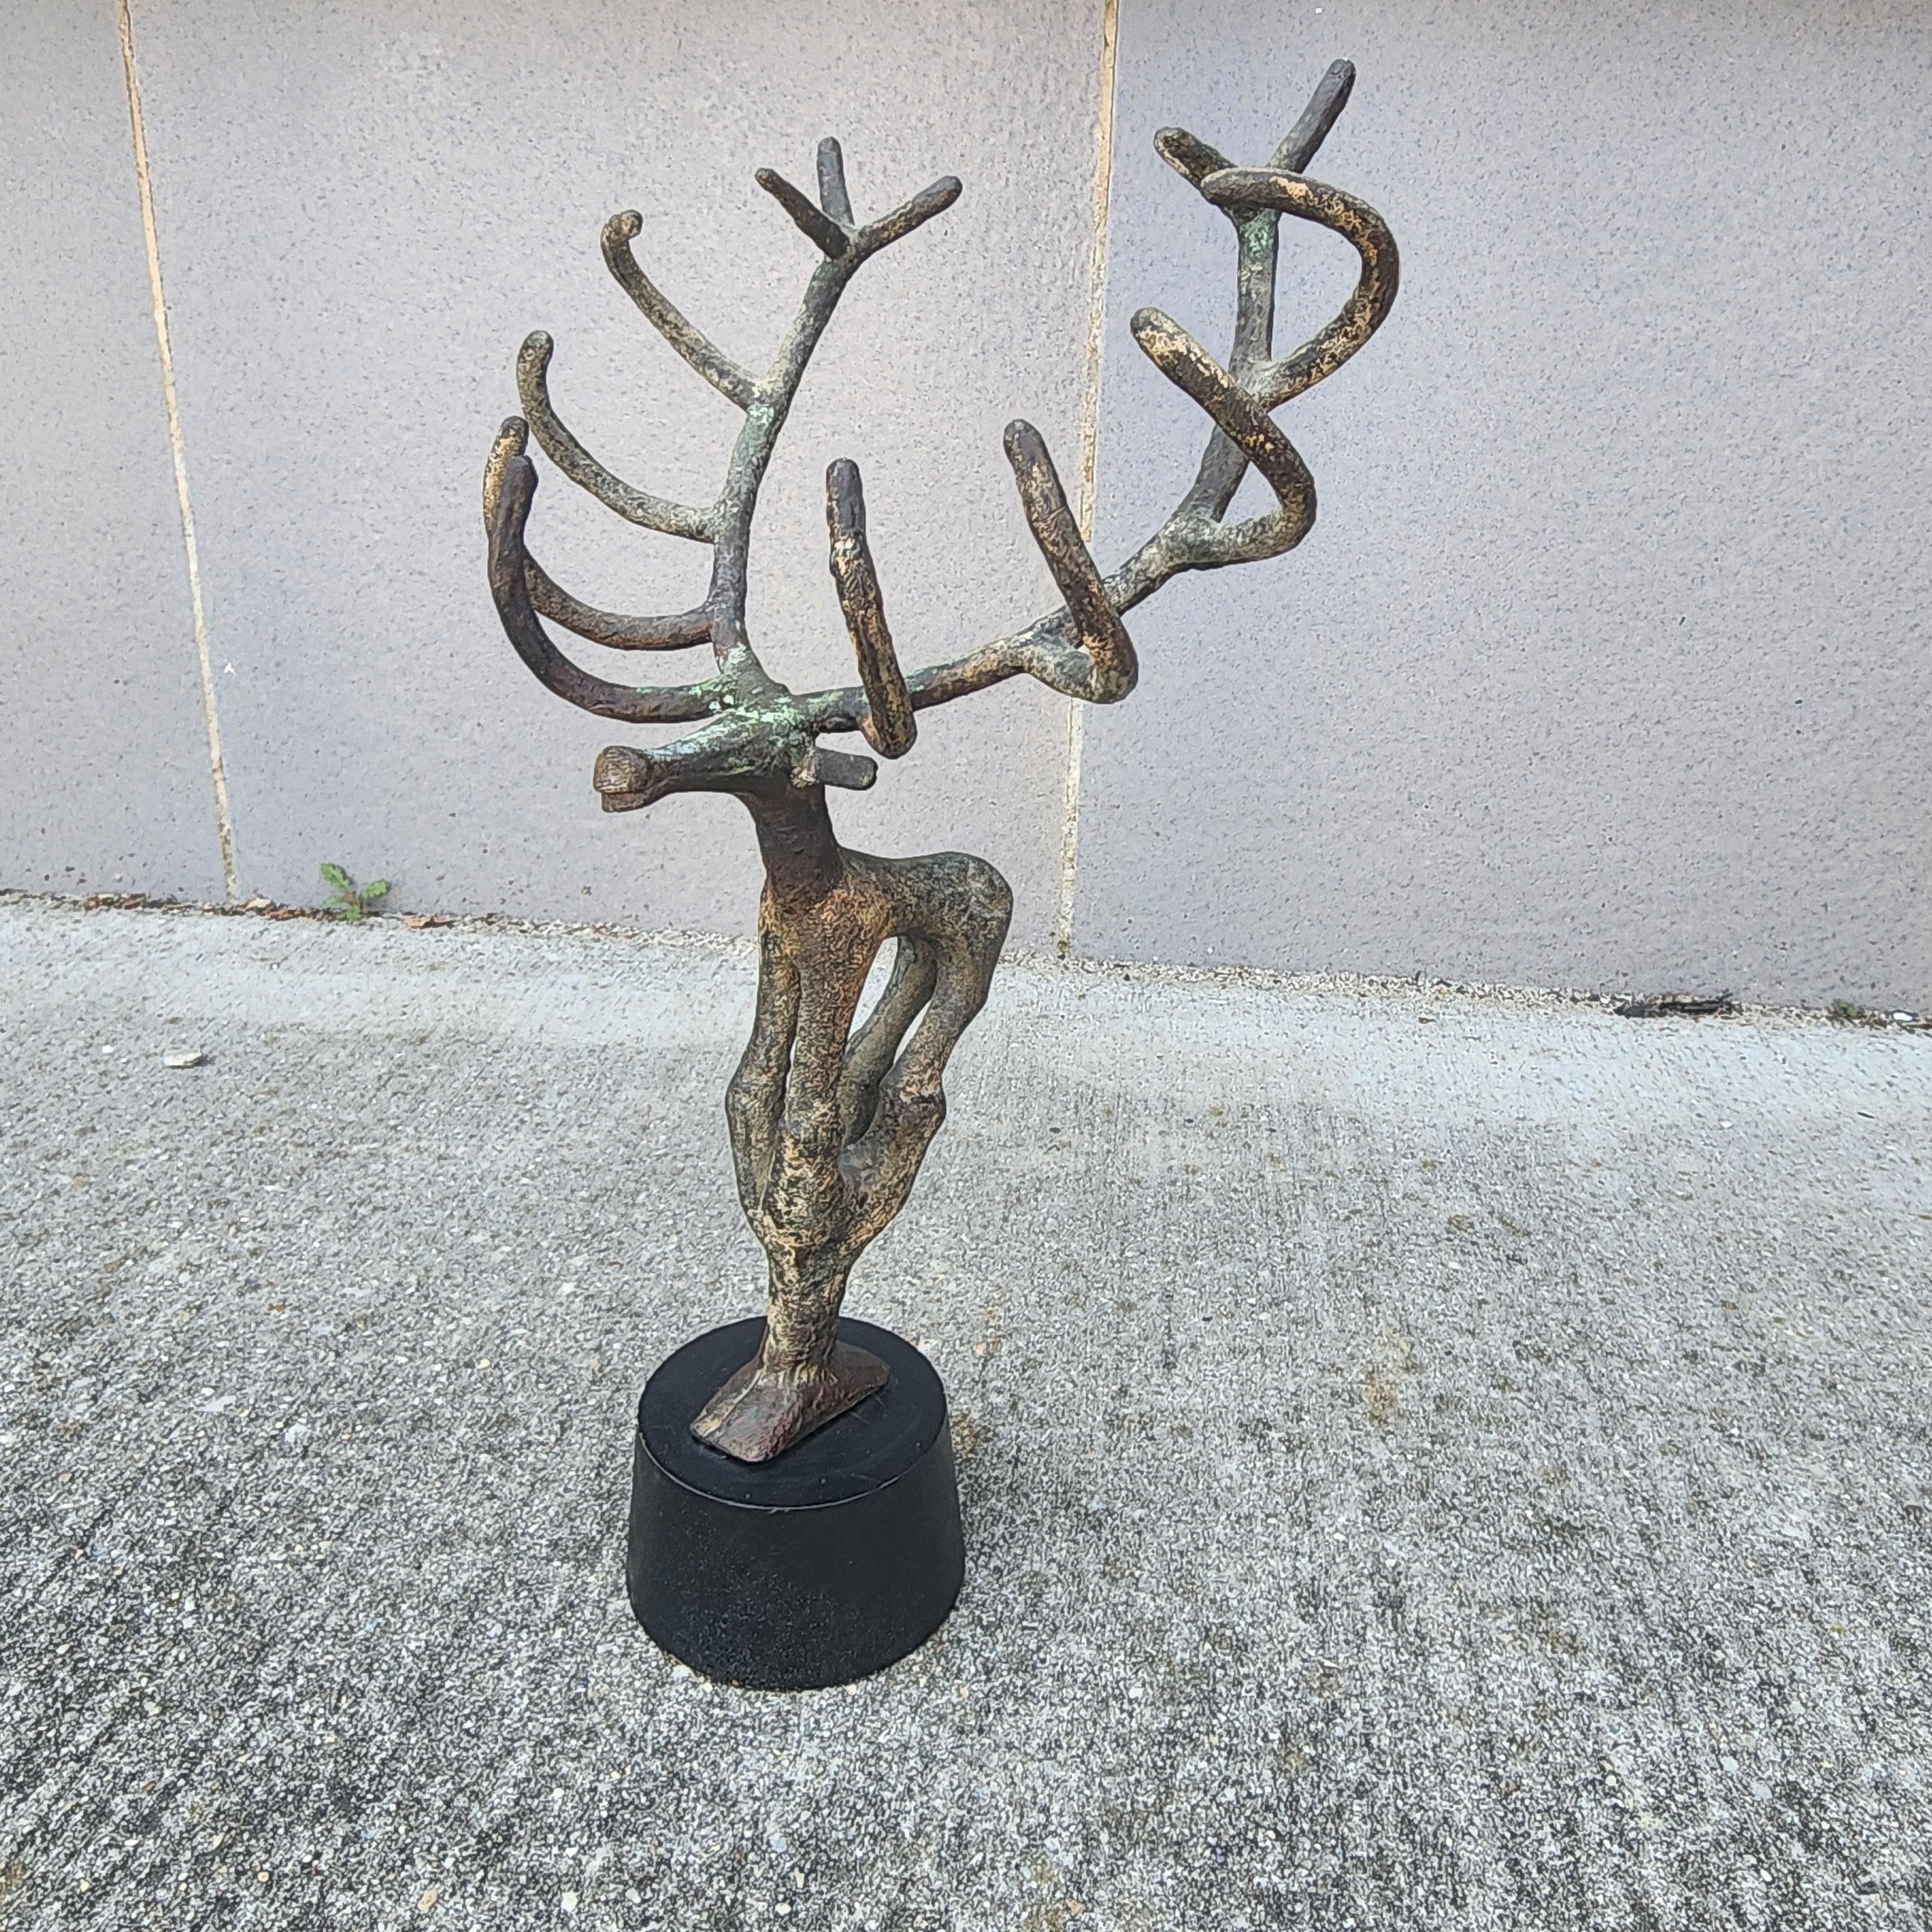 A large sculptural 1950s bronze stag in the shape of a stag. Wonderful applied patina that's further aged since it was applied. Great for a desk or to add some interest on a shelf or mantle.